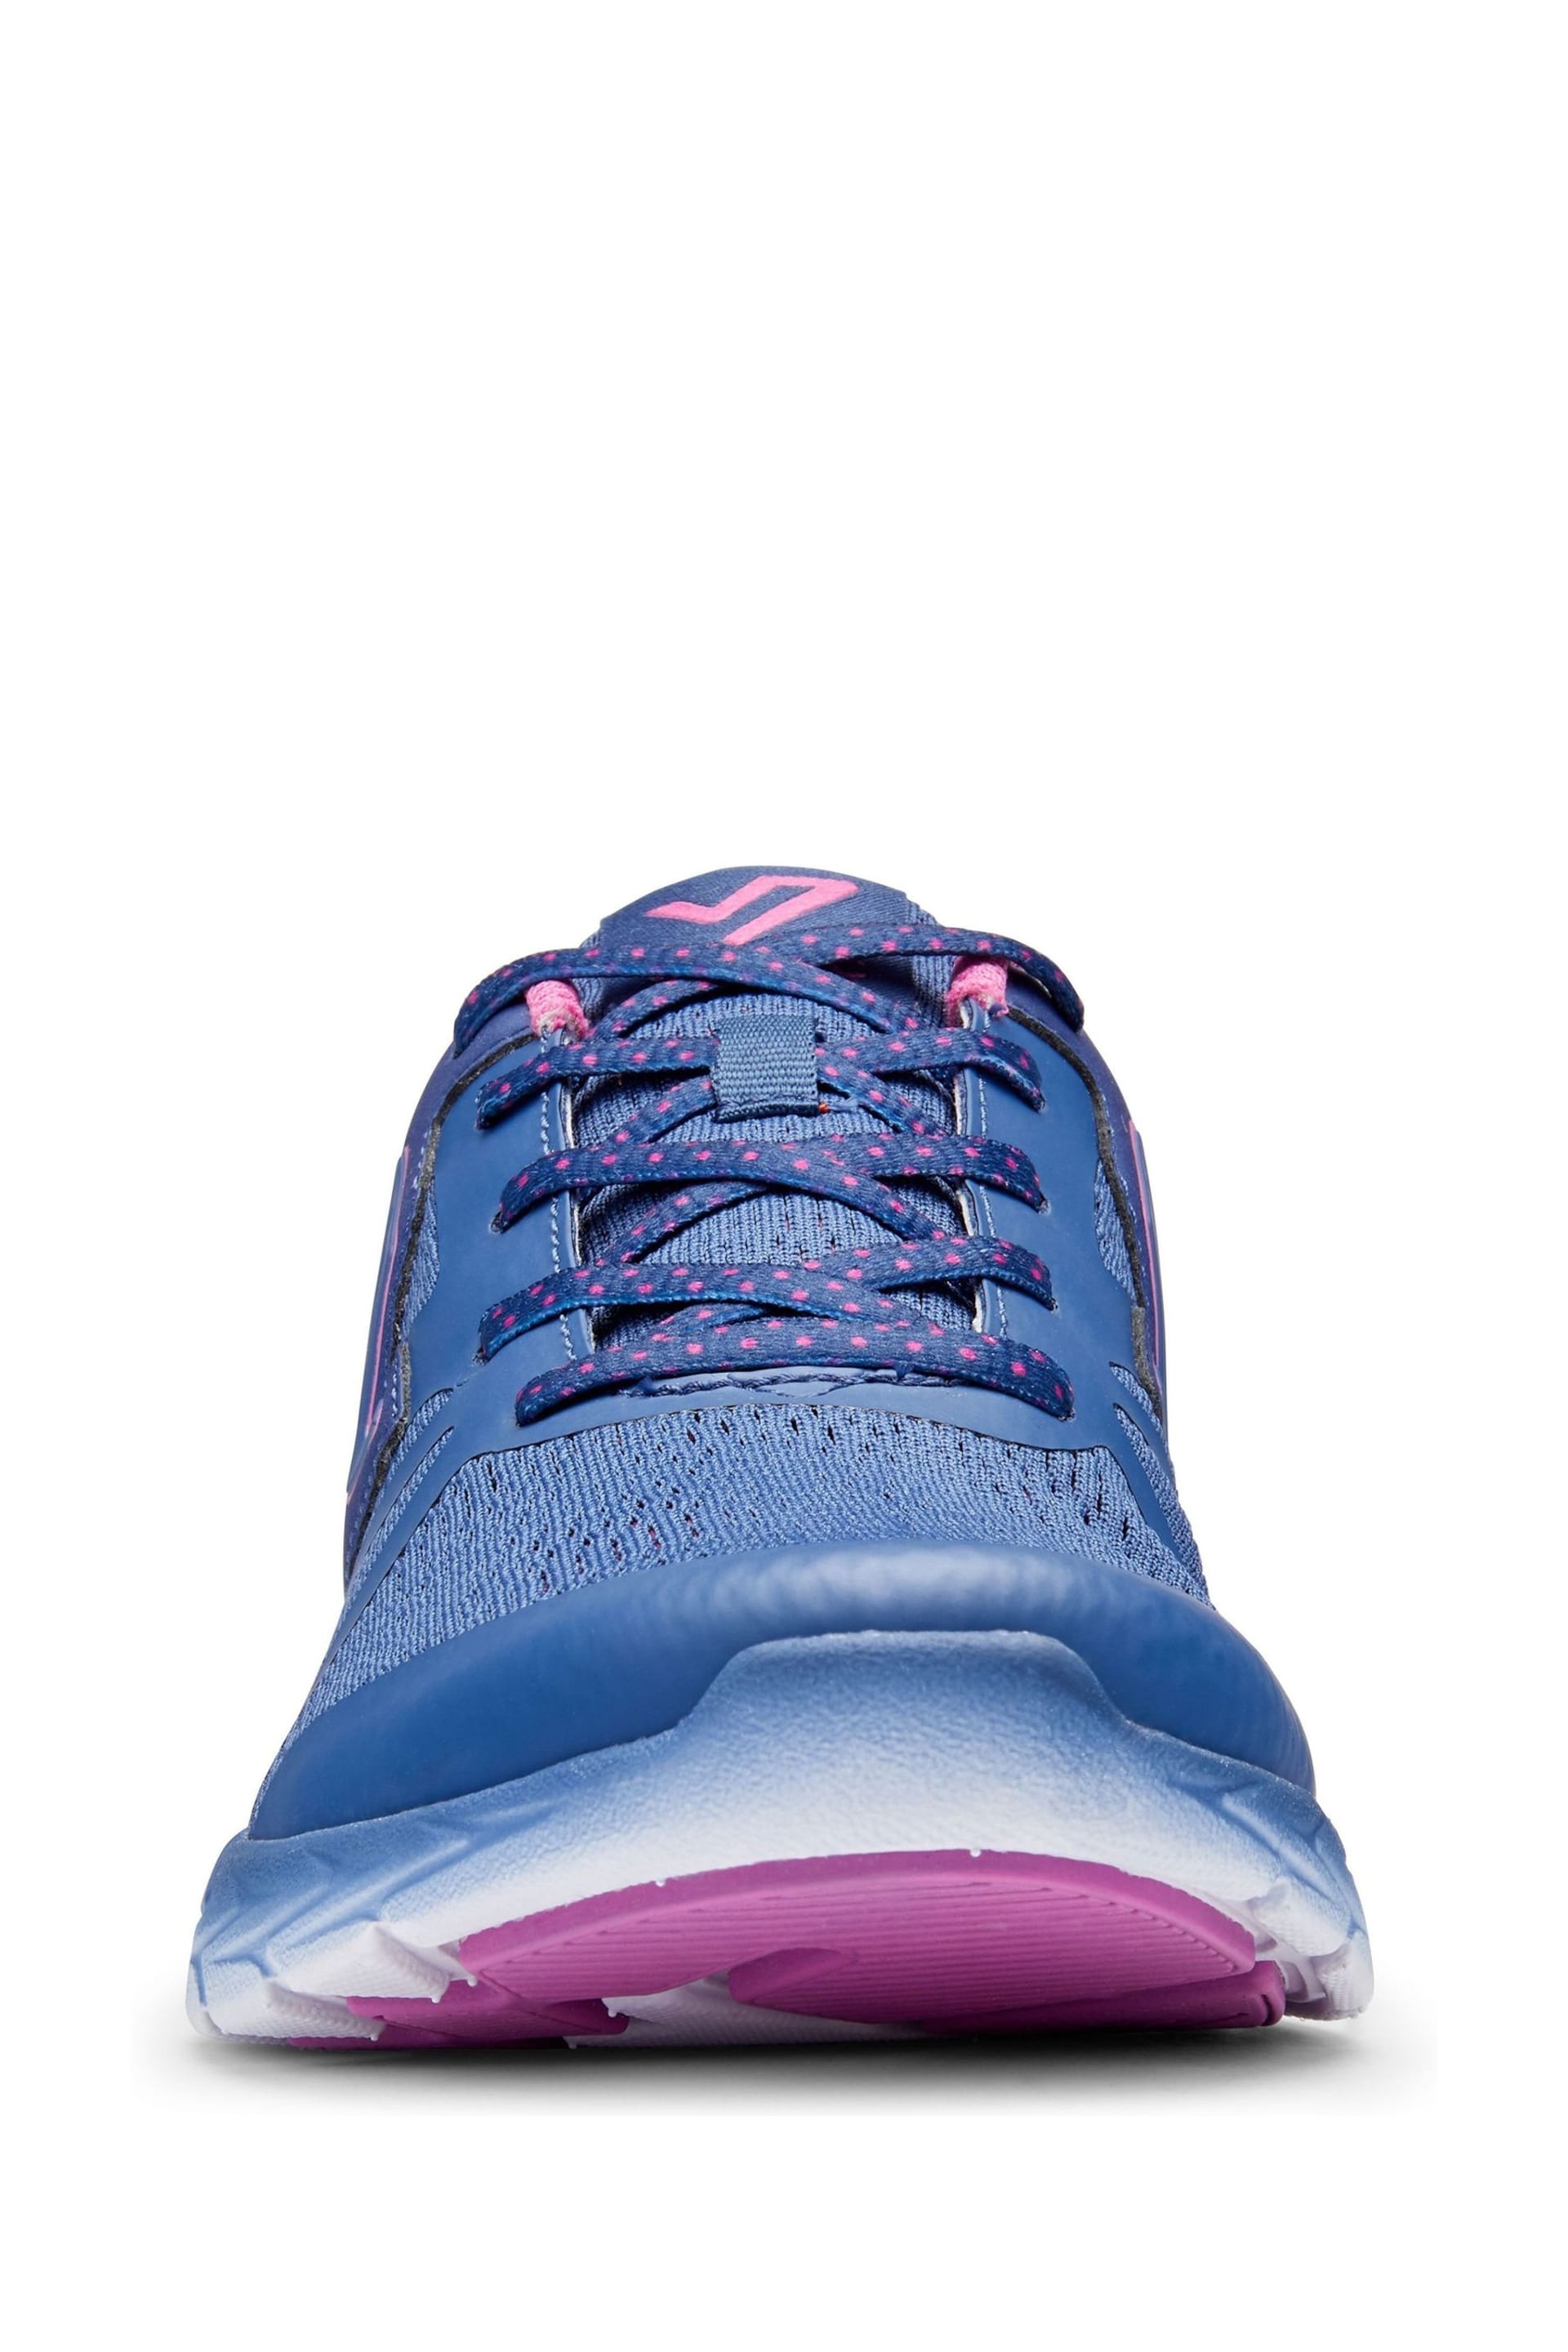 Vionic Miles Sneaker Trainers - Image 4 of 5